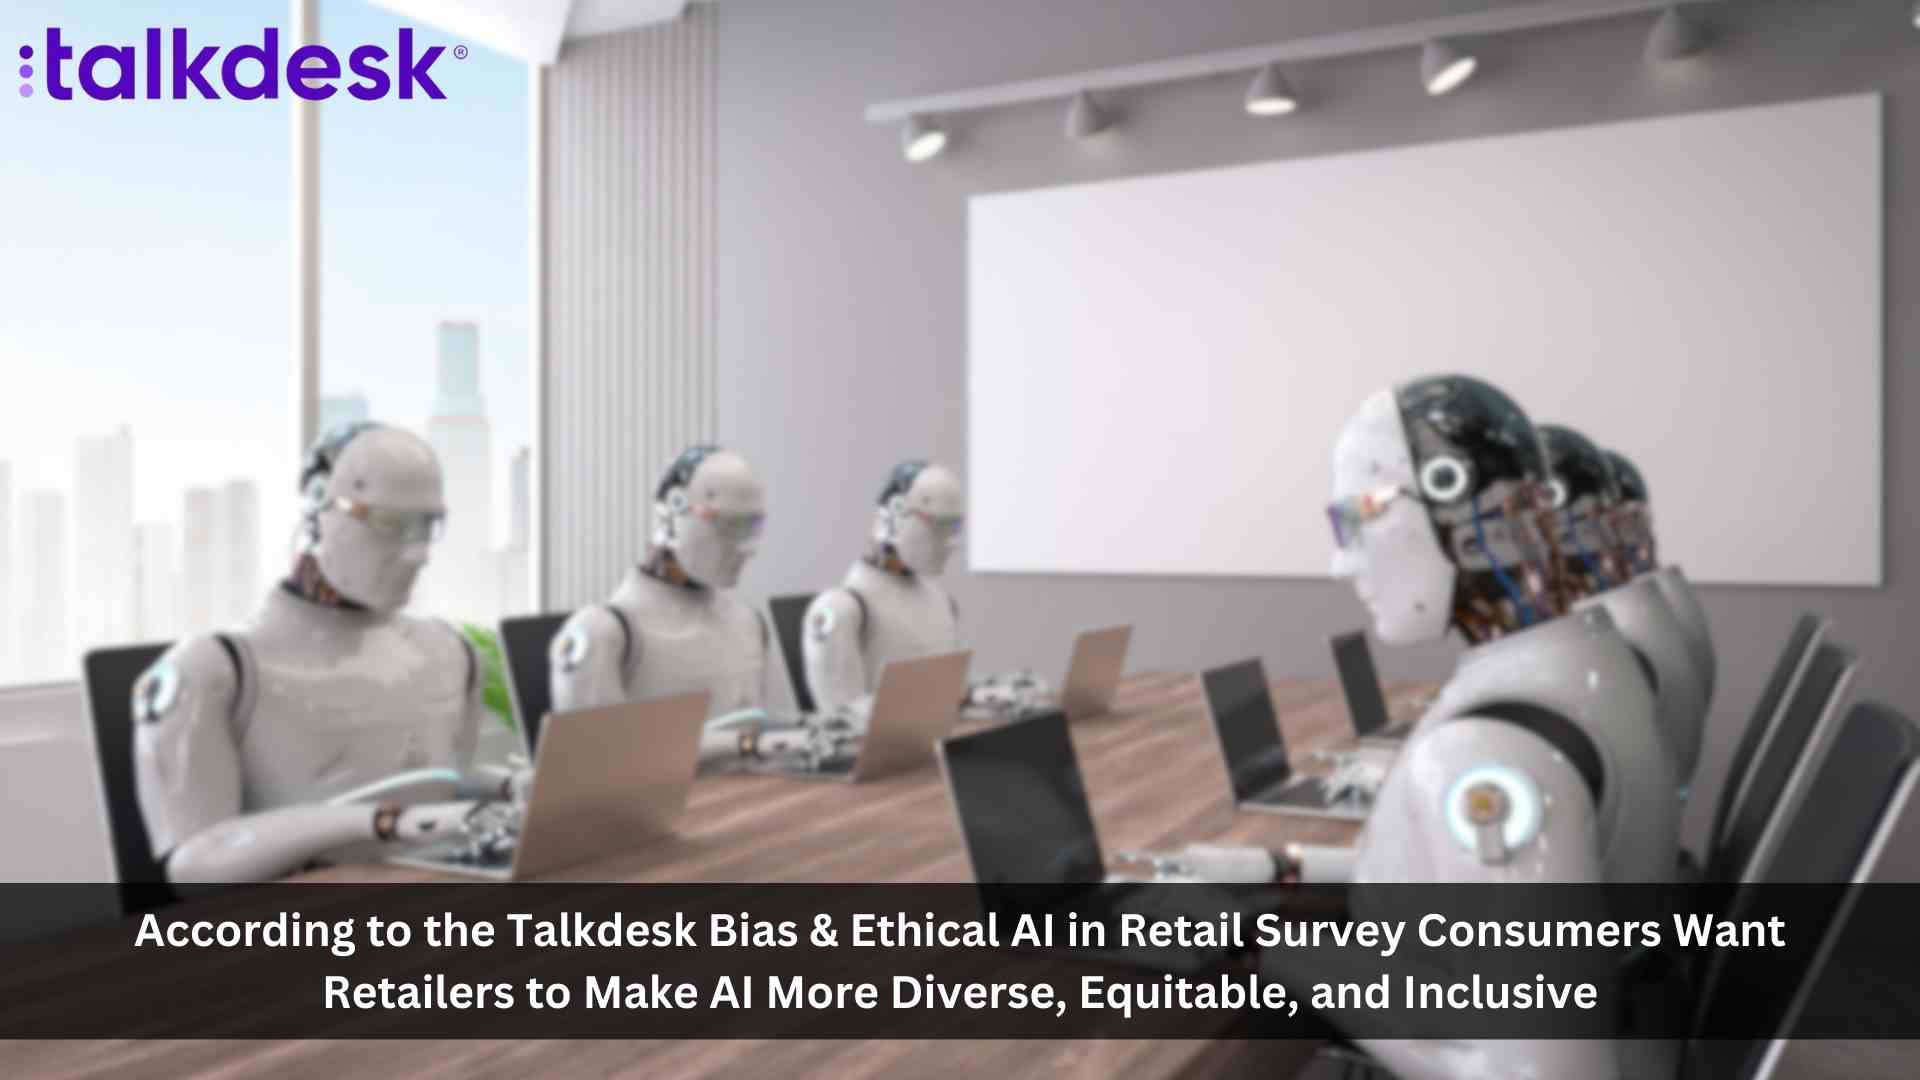 86% of Consumers Want Retailers to Make AI More Diverse, Equitable, and Inclusive, According to New Talkdesk Research